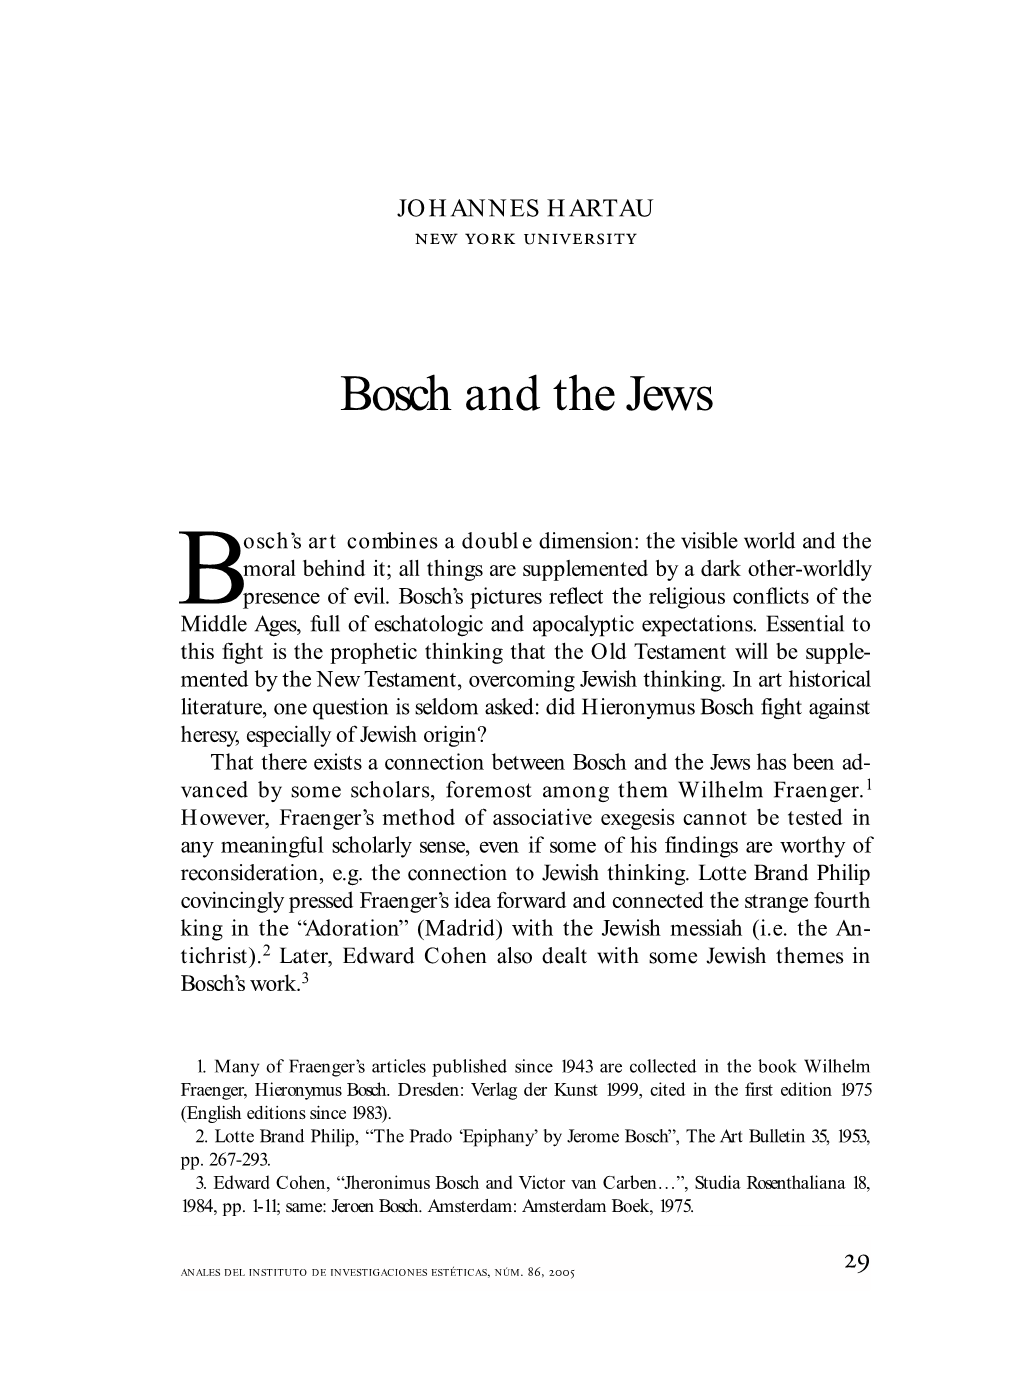 Bosch and the Jews